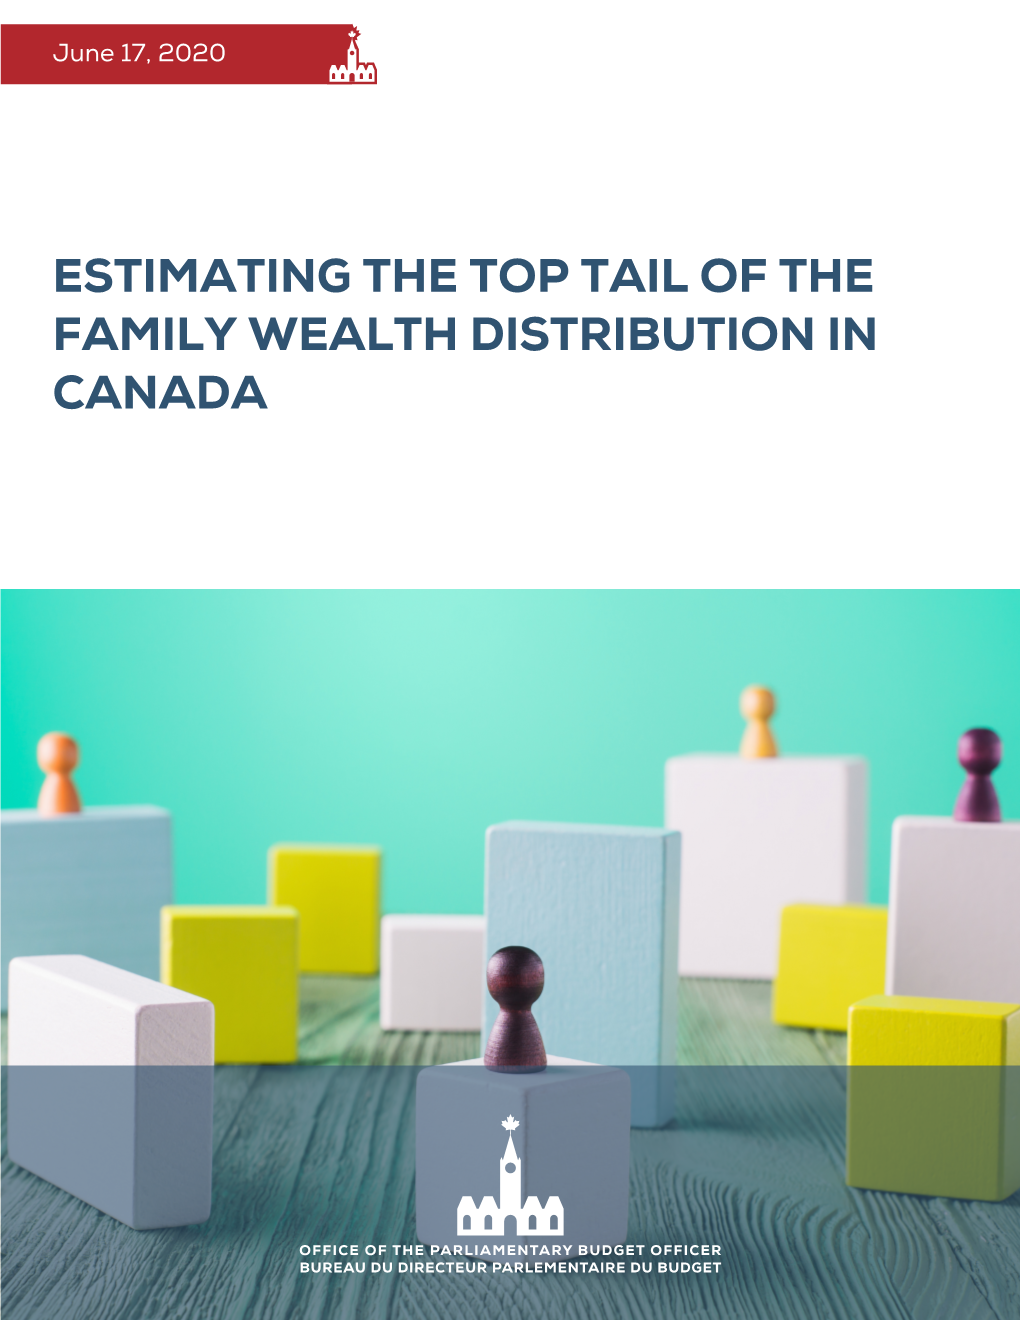 Of the Family Wealth Distribution in Canada